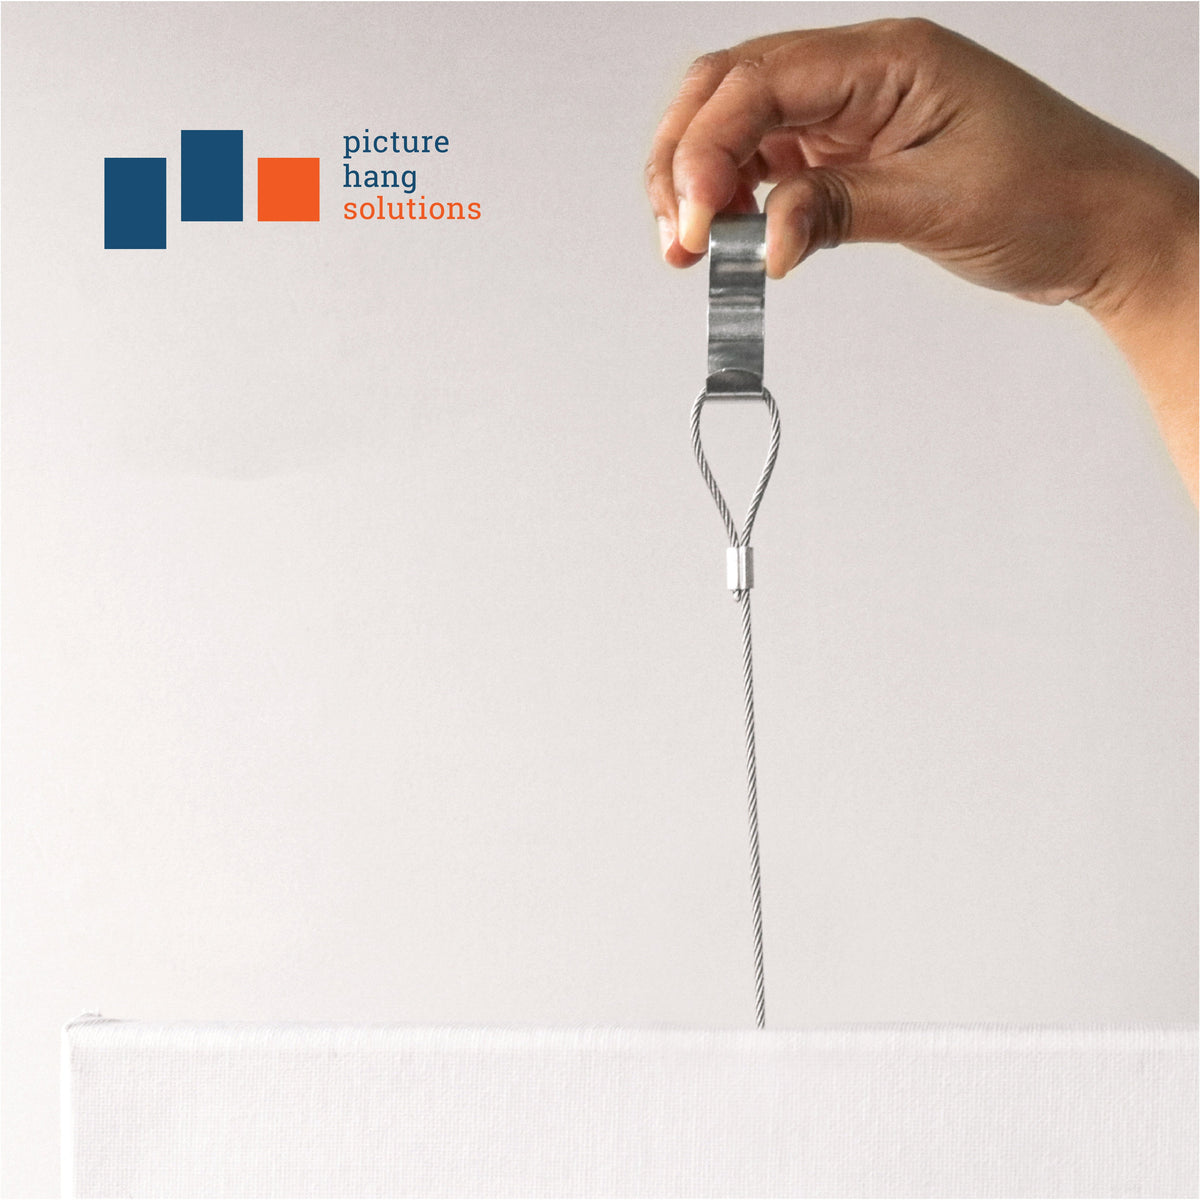 Gallery Kit with Silver Picture Rail Hooks